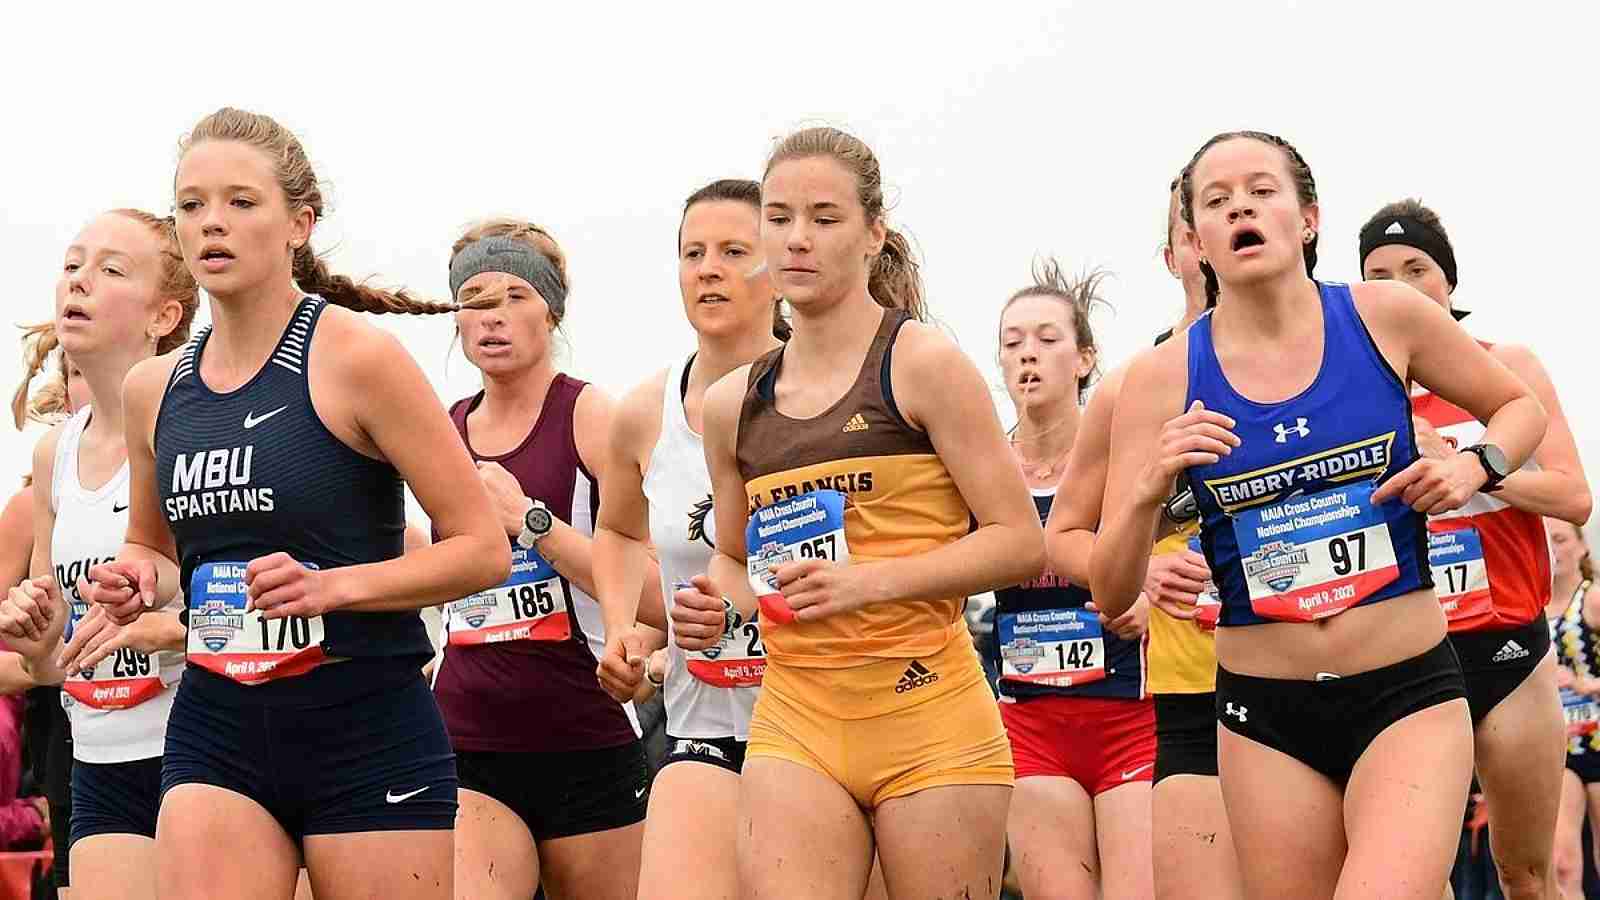 How to watch the 2021 NAIA Cross Country National Championship